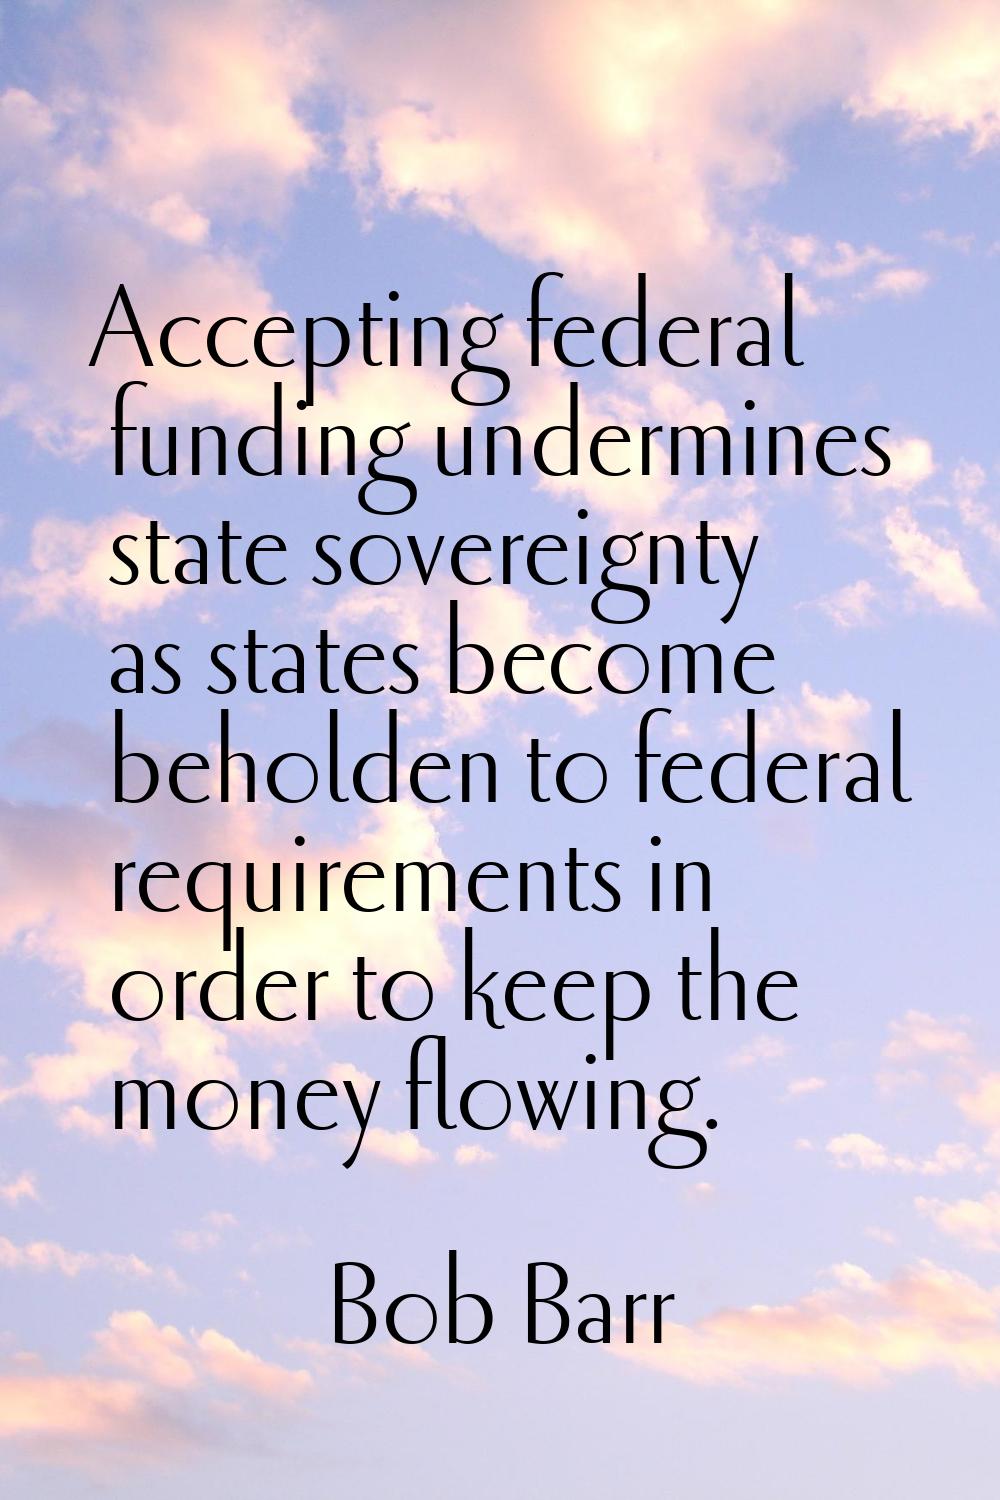 Accepting federal funding undermines state sovereignty as states become beholden to federal require